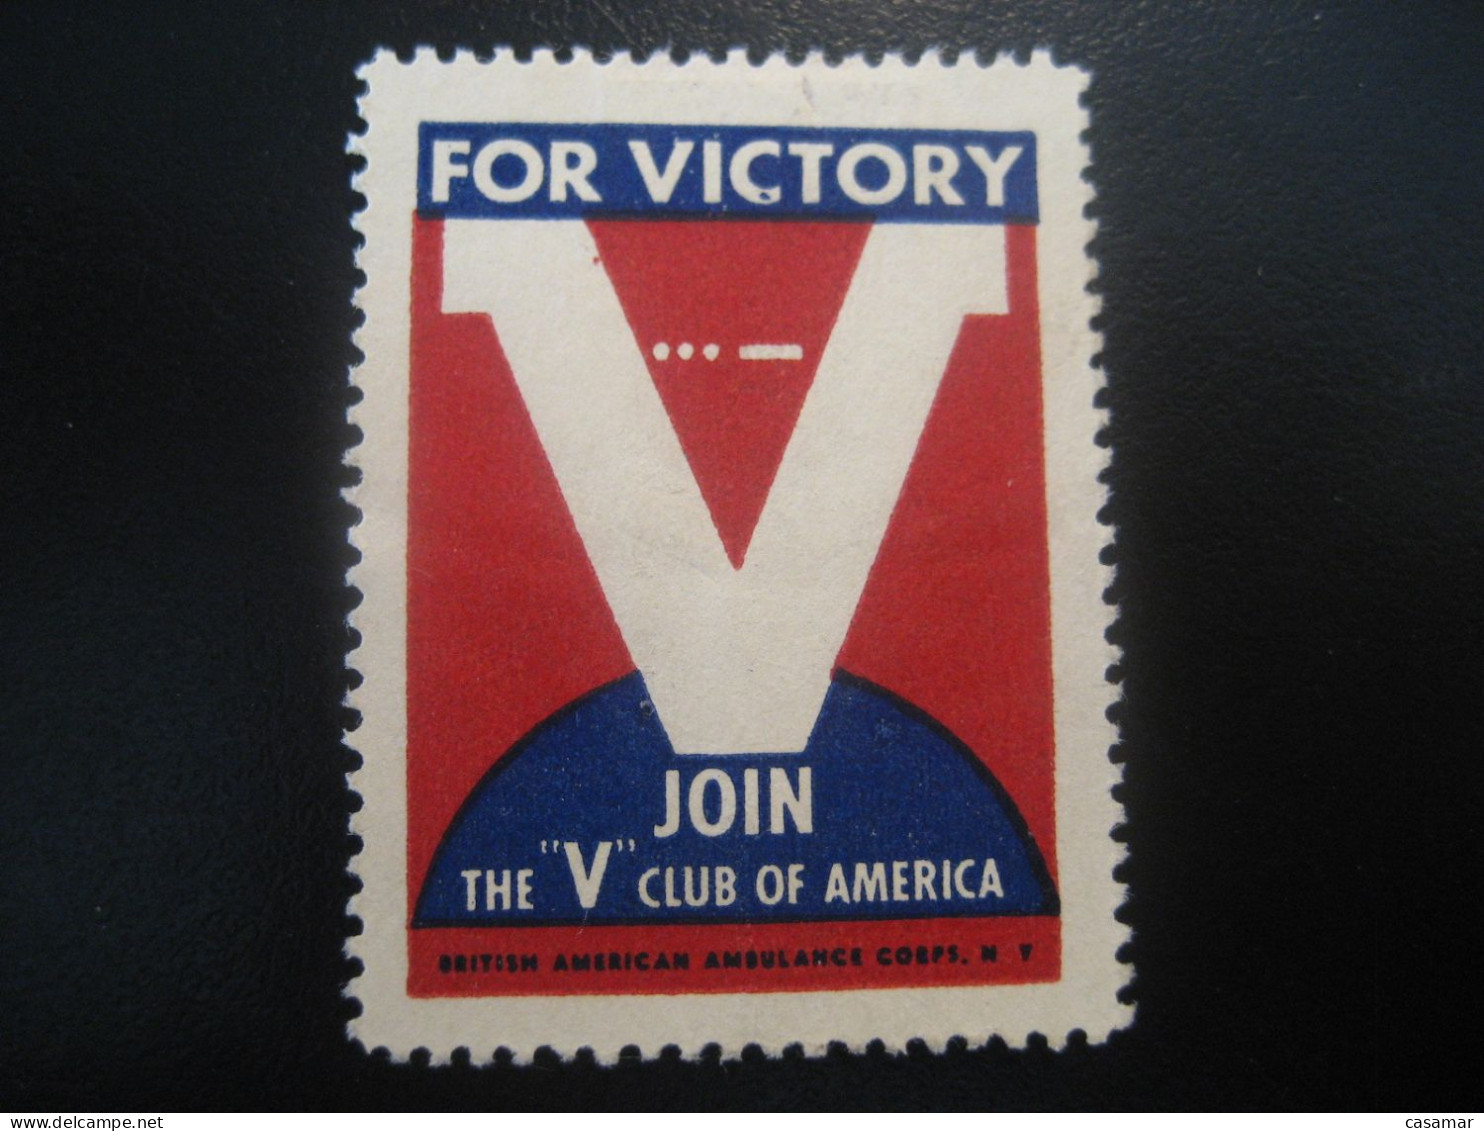 V For Victory Join The V Club Of America WW2 WWII Military War Poster Stamp Vignette USA Label - WO2